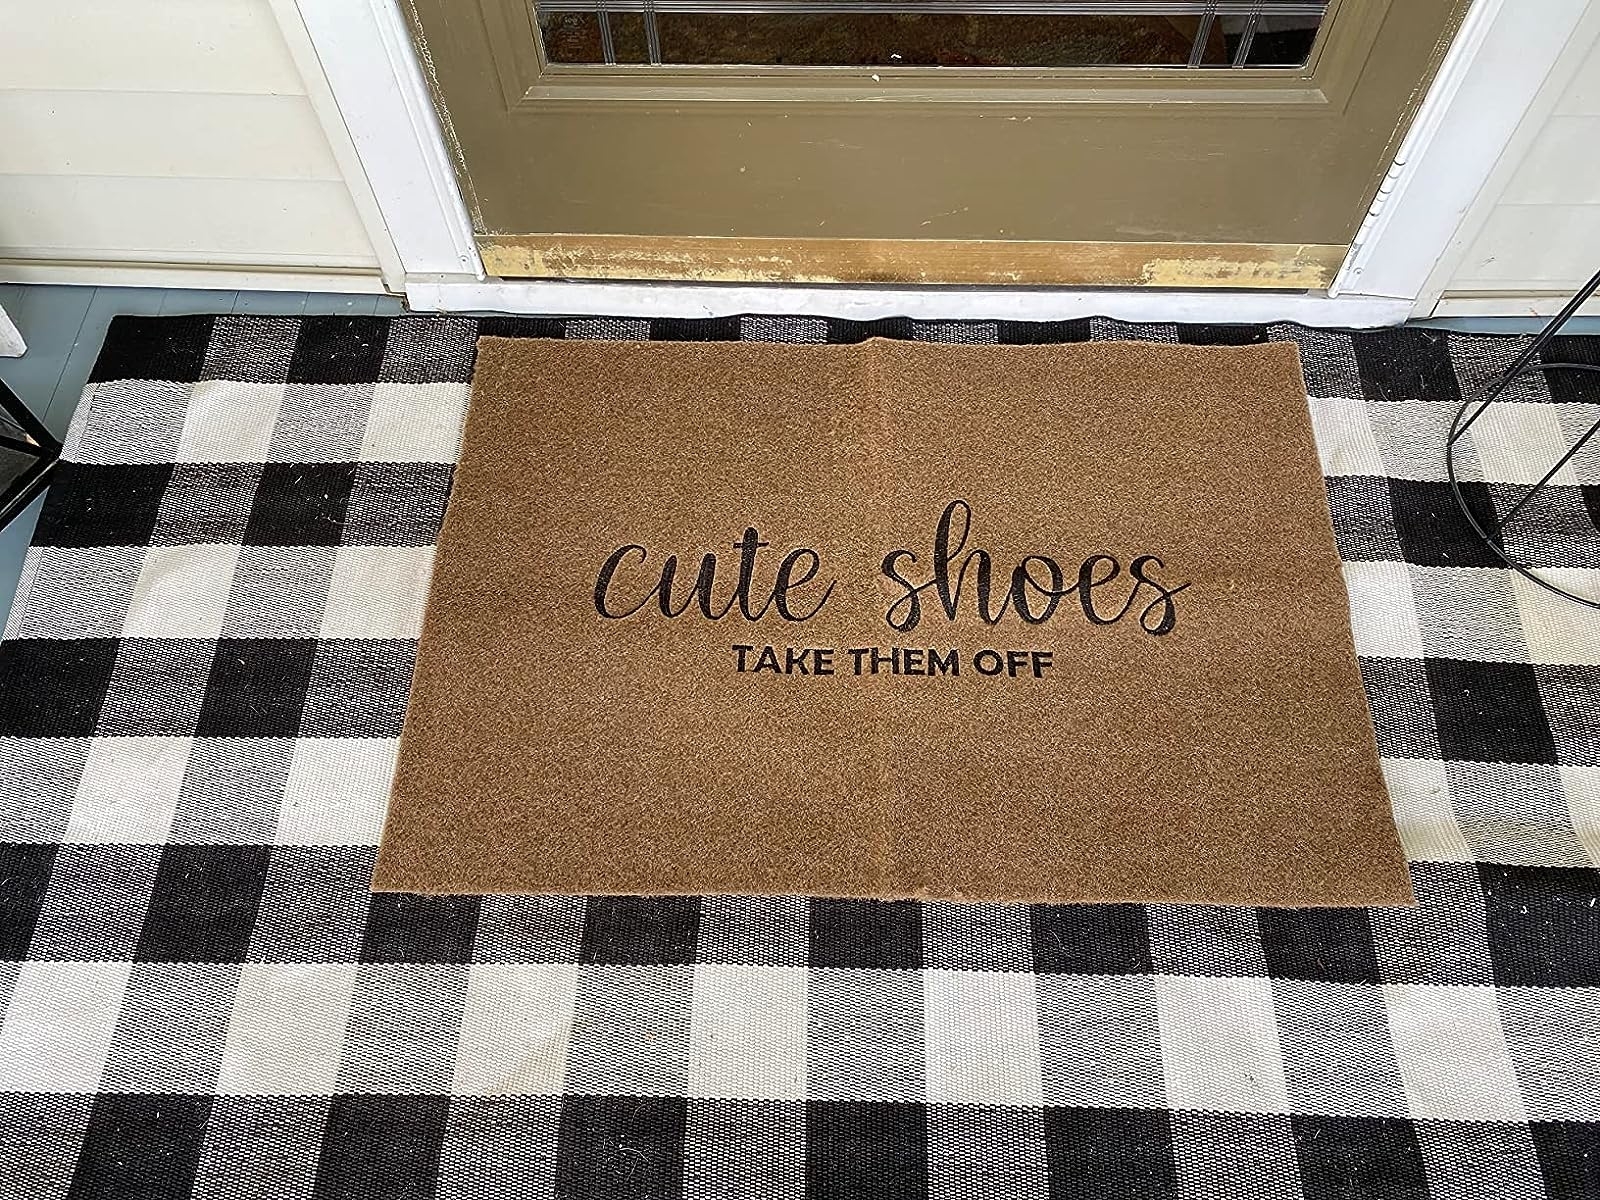 Reviewer image of the door mat on top of a buffalo check rug